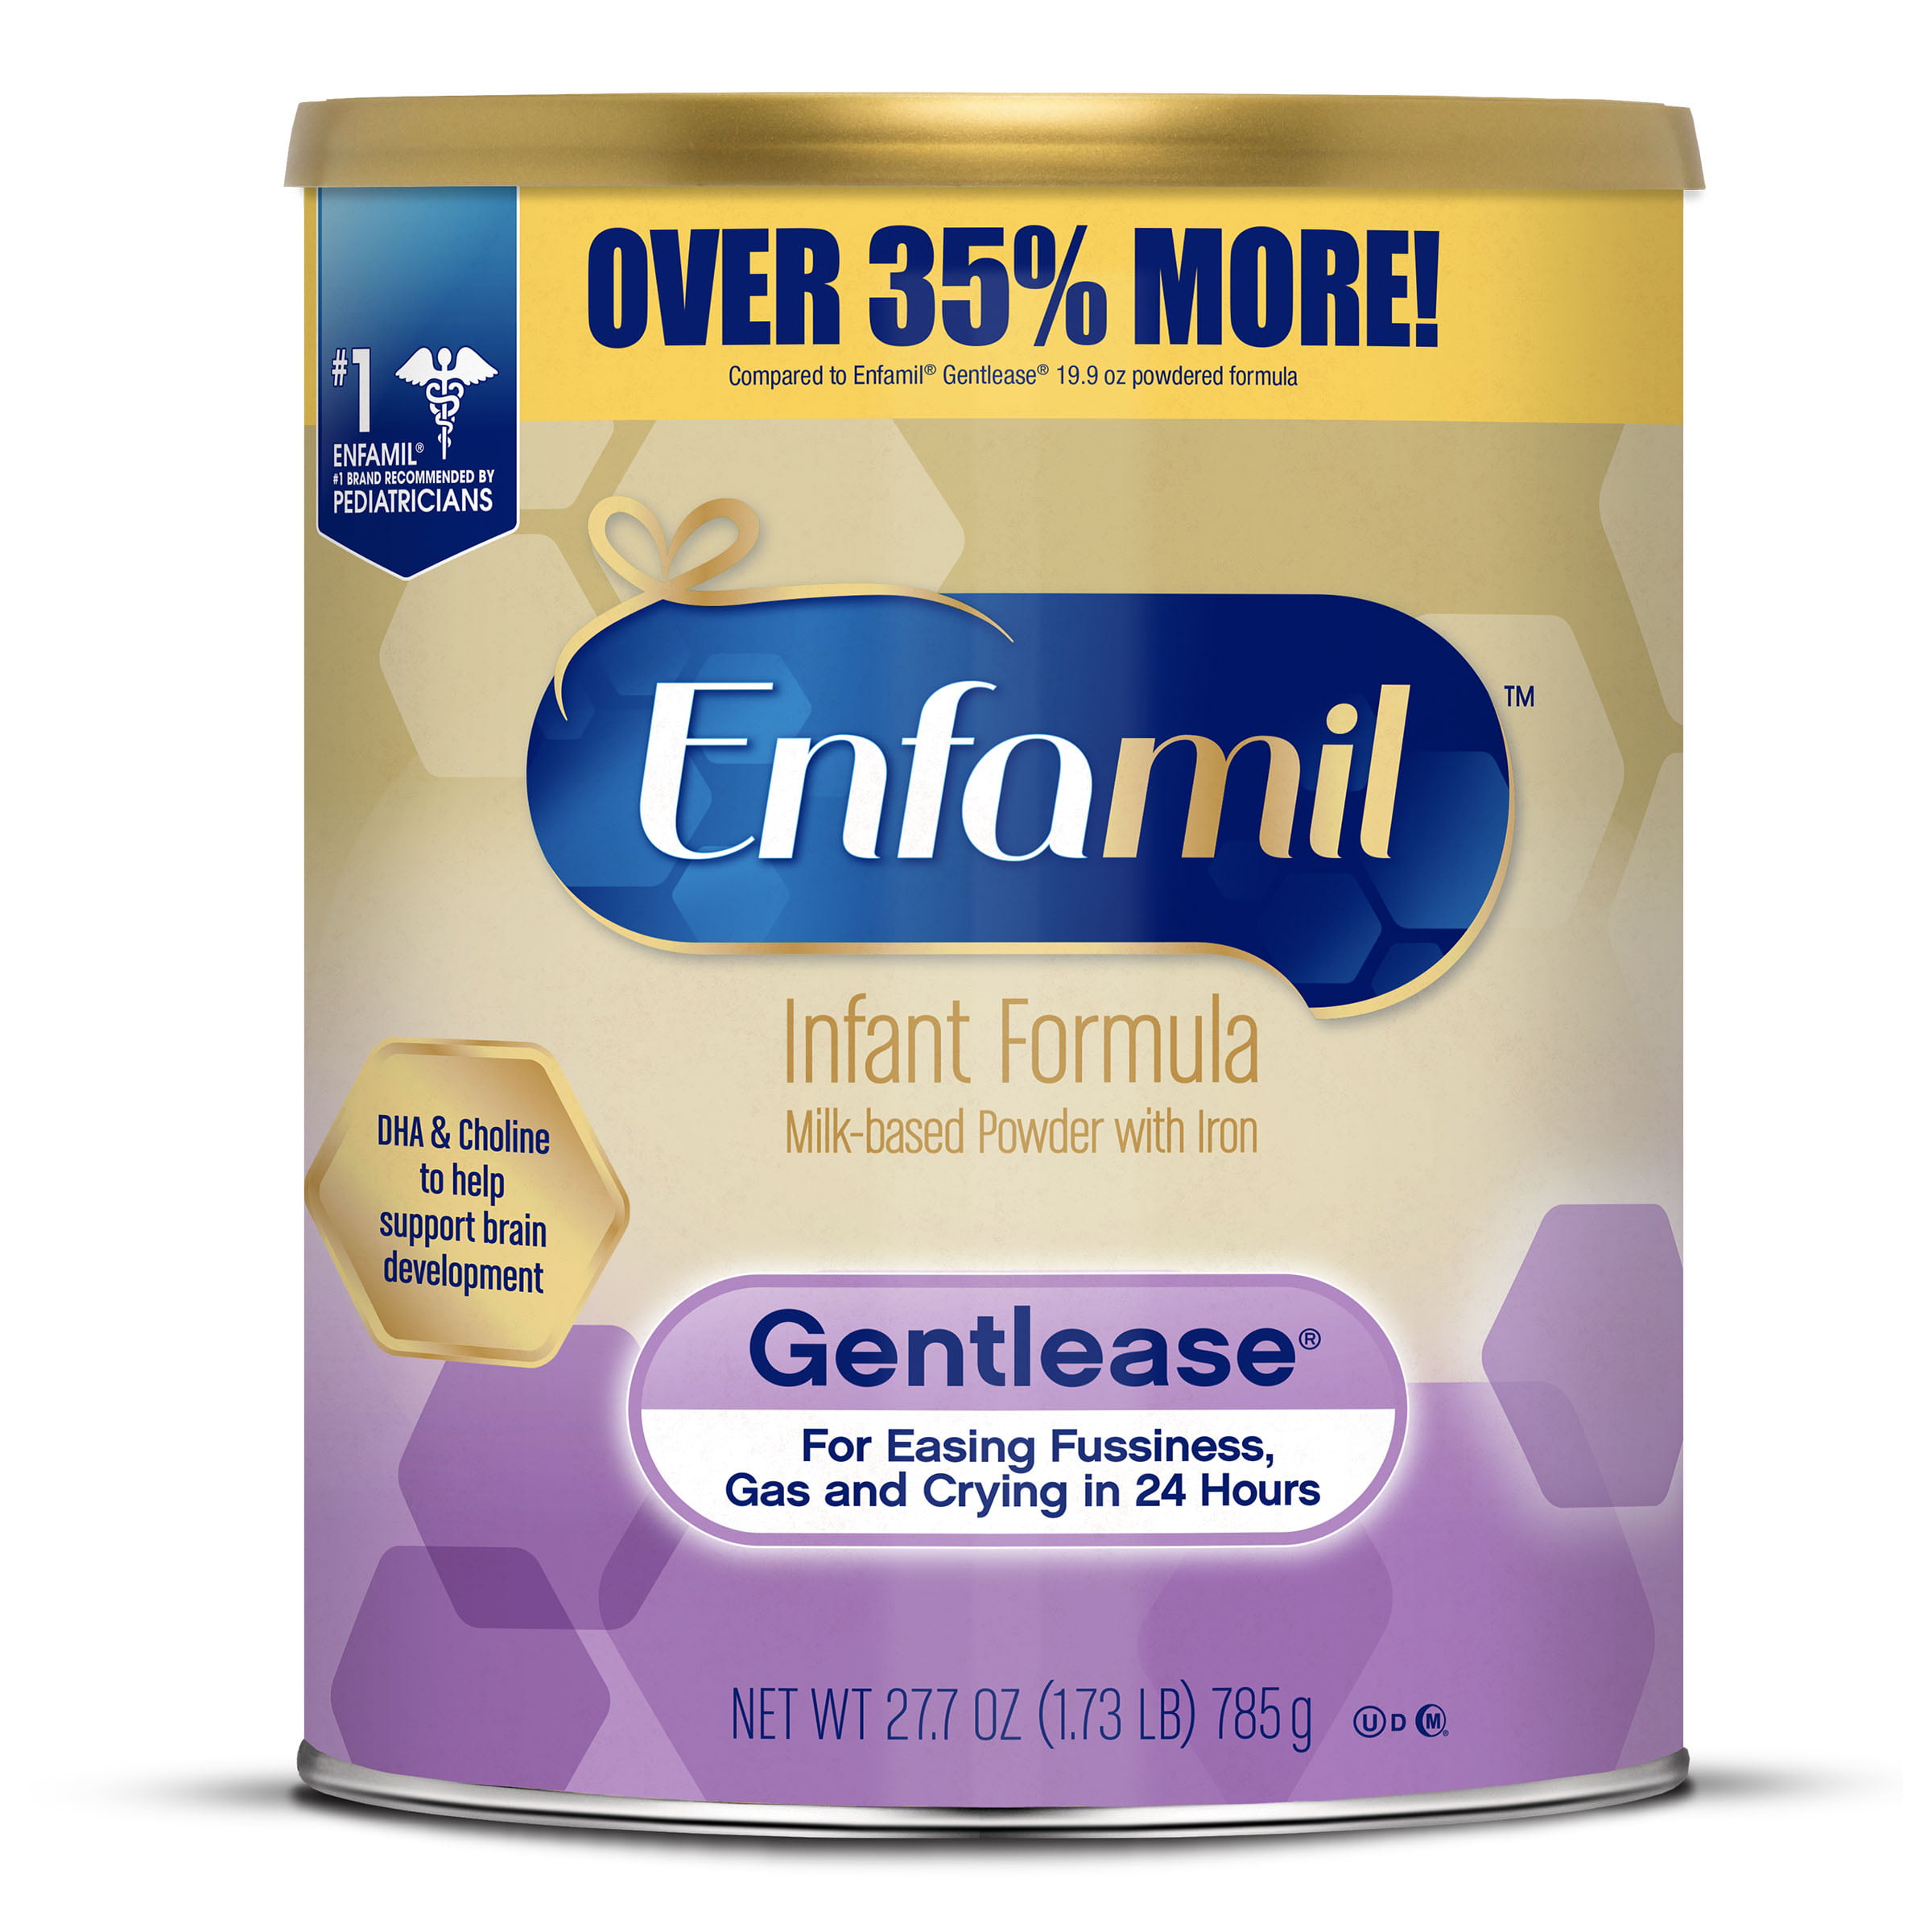 enfamil-gentlease-baby-formula-reduces-fussiness-gas-crying-and-spit